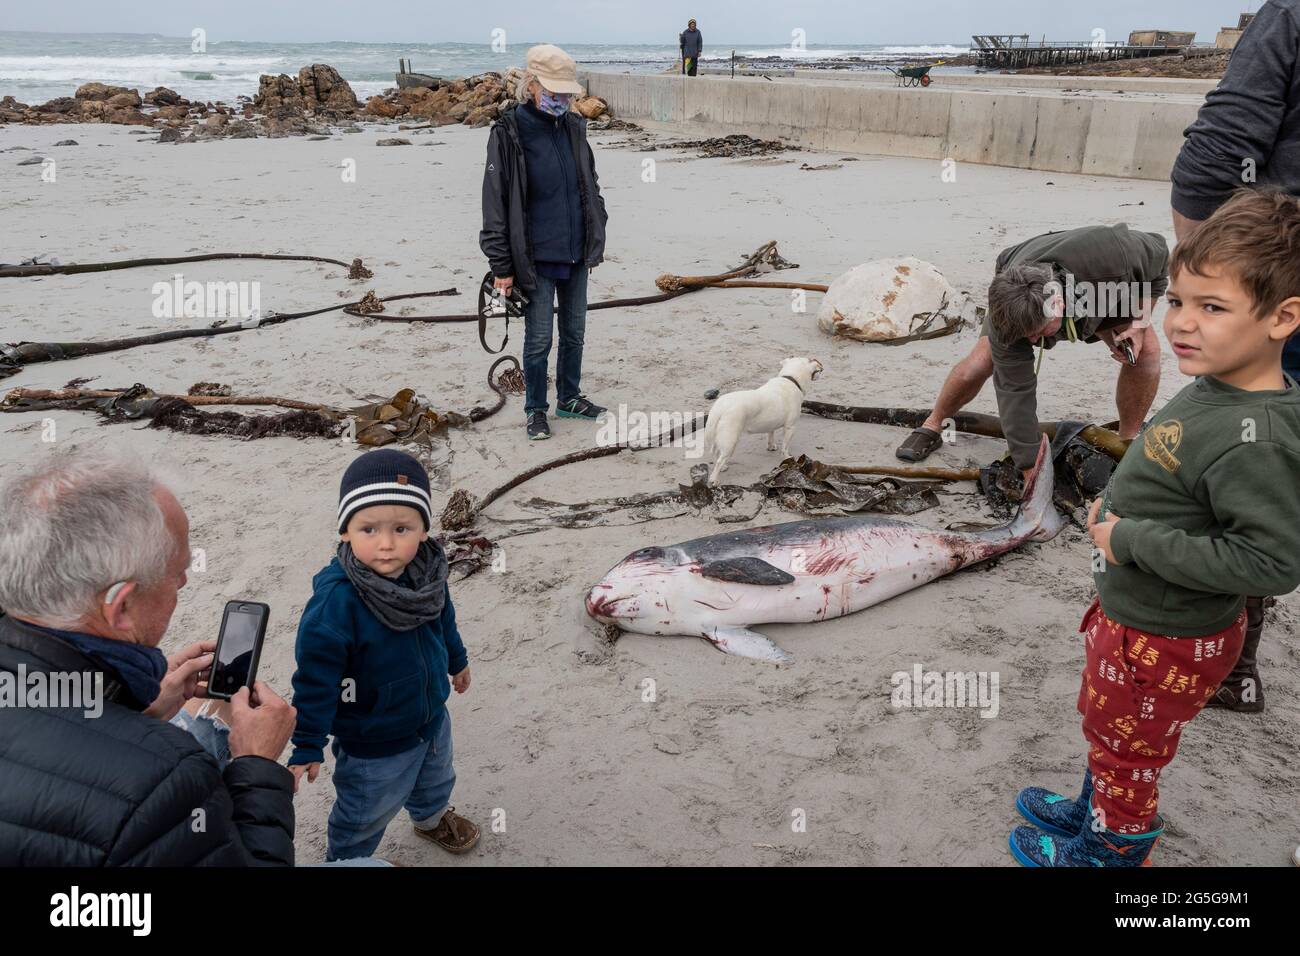 People look at juvenile Pygmy Sperm Whale (Kogia breviceps) carcass washed up on beach at Witsands, near Misty Cliffs, Cape Peninsula, South Africa. Stock Photo